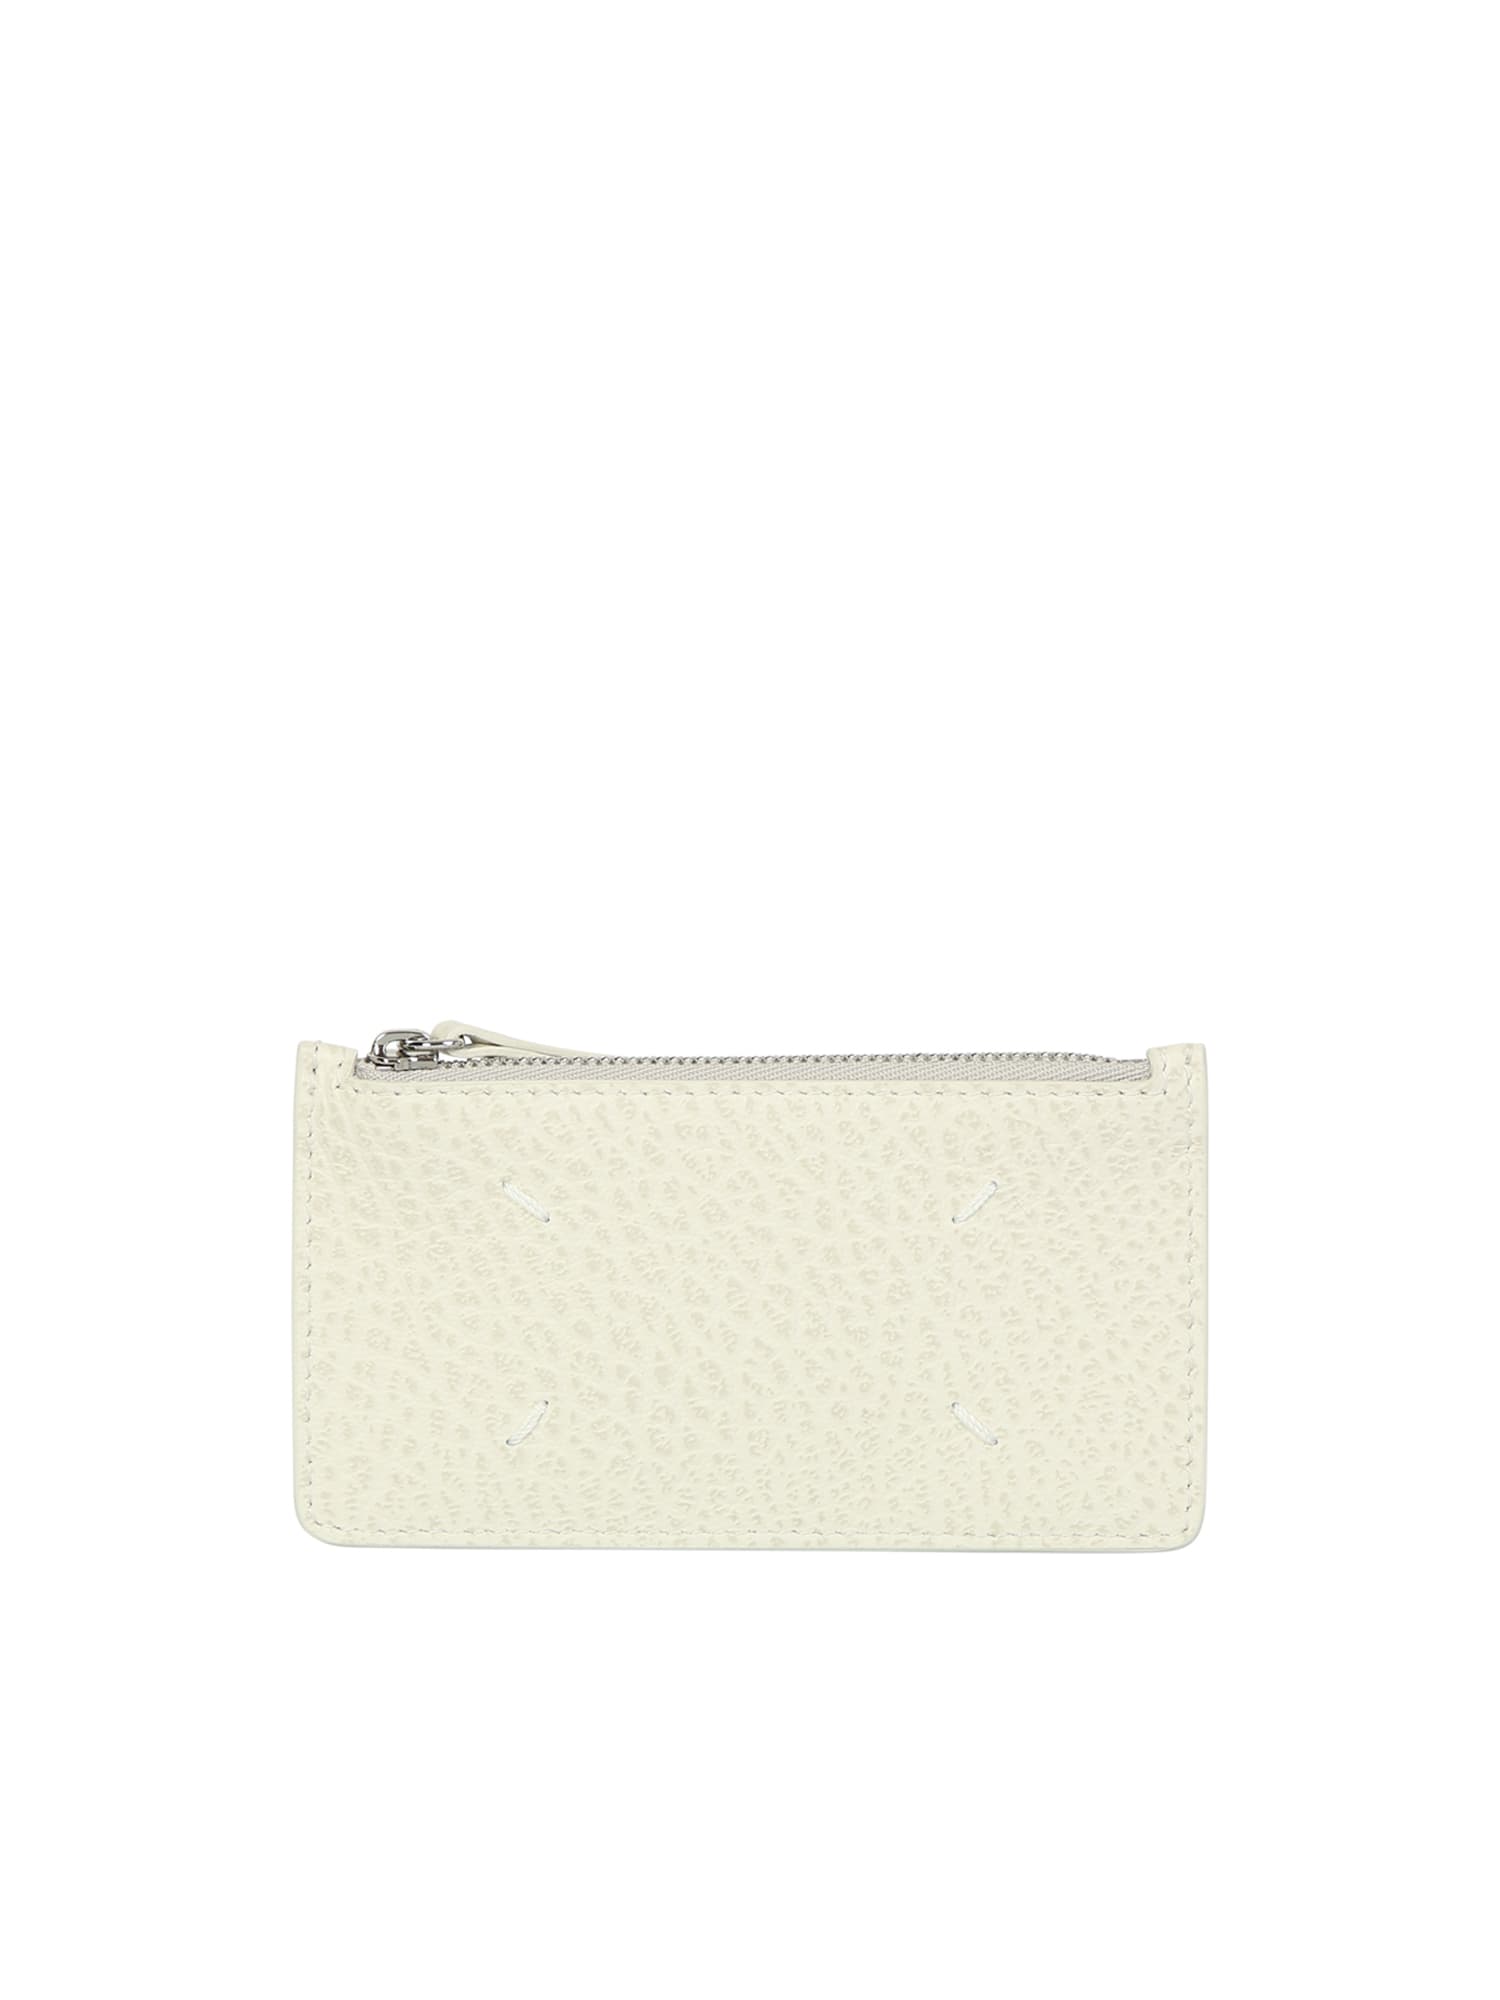 Zippered Cardholder By Maison Margiela; Made Entirely In Italy, It Boasts Of Its Iconic Logo With Four Stitches